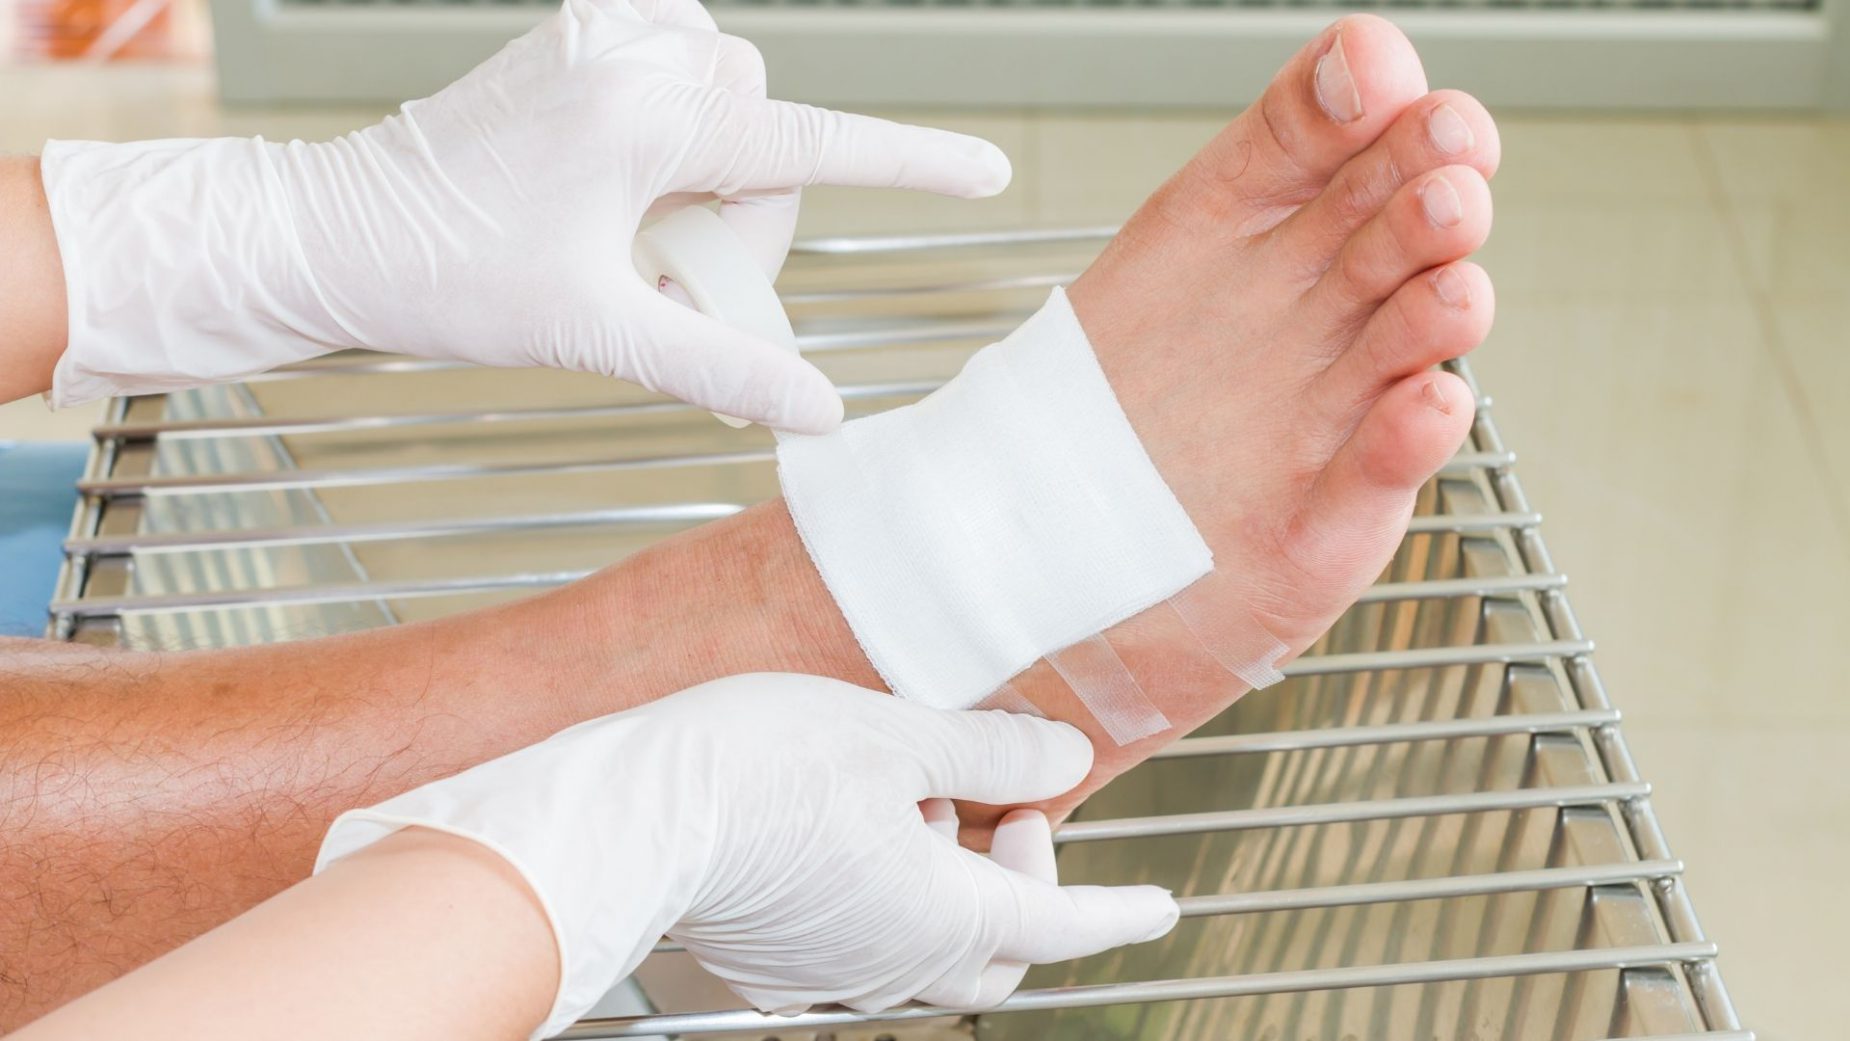 Wound Care Devices Market